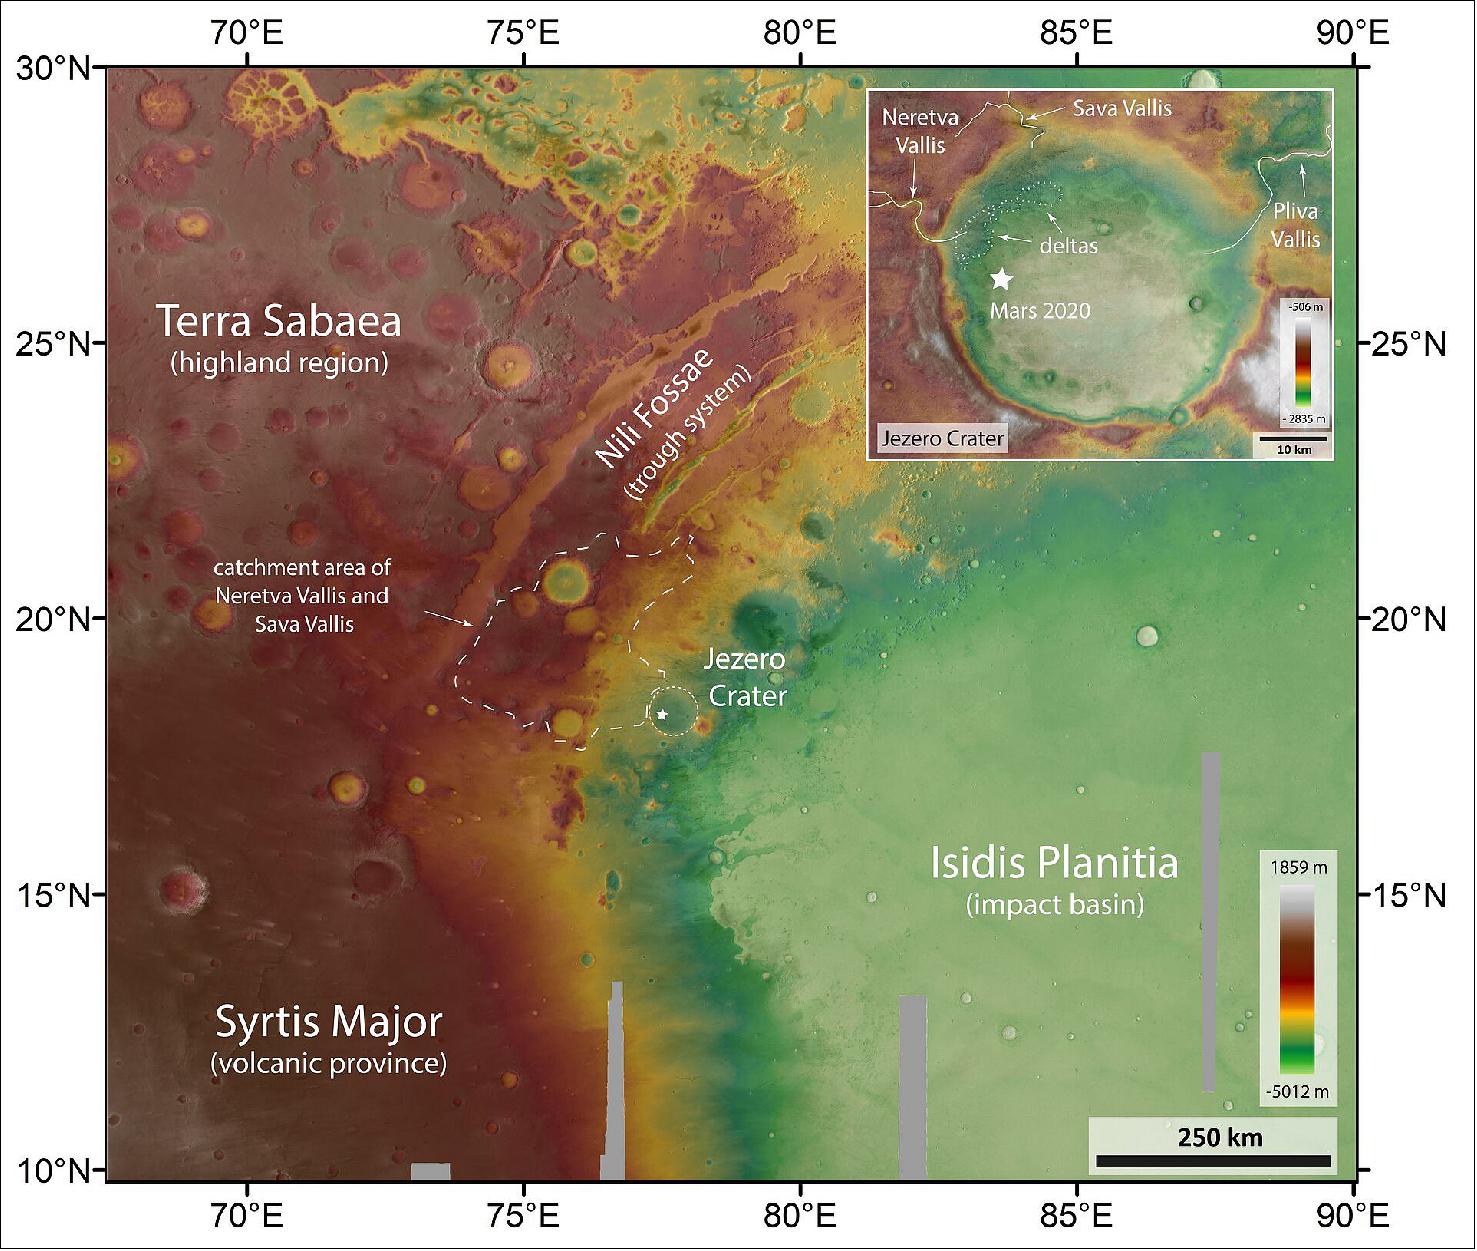 Figure 54: Topographic map of Jezero crater and surrounds (annotated). This elevation map of Jezero crater and its surrounds shows the topography of the broader region, from the highlands (red and browns) to the lower lying floor of the Isidis impact basin (green). The height difference in this area of 1.5 million square kilometers is over 6800 meters, with the floor of Jezero crater lying at an elevation of approximately minus 2600 meters below the ‘Mars Areoid’, a notional plane of equal gravitational attraction, analogous to sea level on Earth. Jezero crater, the landing site of NASA’s 2020 Perseverance rover mission, is marked on the map. It hosts two river deltas from inflow channels that once brought water into Jezero, which is thought to have once hosted a lake. - This elevation map was created from ESA Mars Express data. The High Resolution Stereo Camera’s nine sensors, arranged at right angles to the north-south flight direction, record the surface of Mars from different angles and in four color channels. From the four inclined stereo channels and the nadir channel, which is directed perpendicular to the surface of Mars, scientists at the DLR Institute of Planetary Research and the Freie Universität Berlin compute digital terrain models, which assign elevation information to each pixel. The high resolution of the data processed for this image allows for greater enlargement of the images for a closer look at individual details of the landscape (ESA/DLR/FU Berlin, CC BY-SA 3.0 IGO)